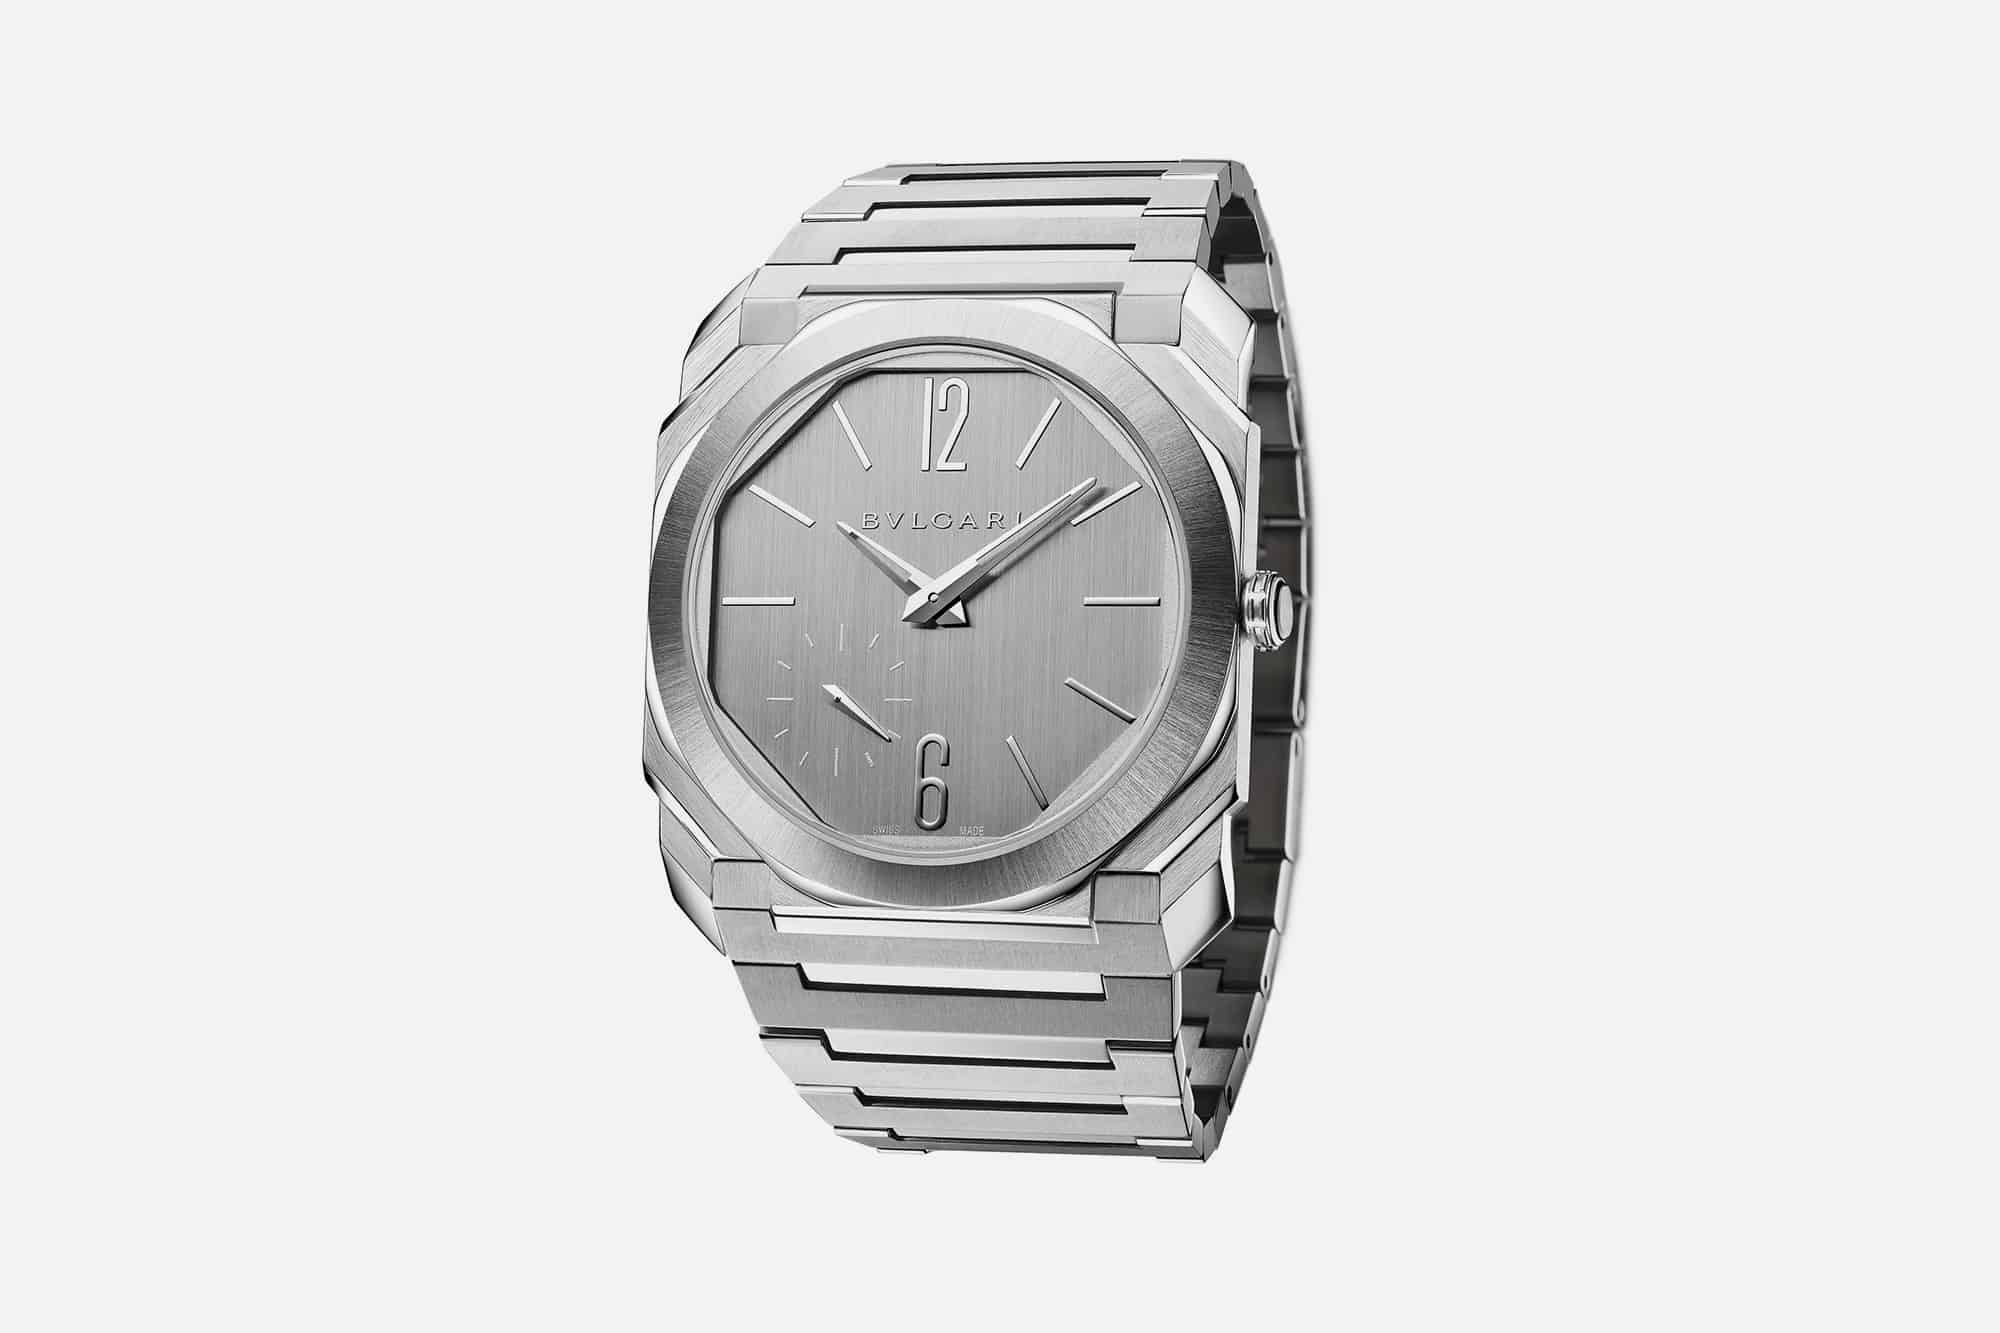 Bulgari Introduces a New Octo Finissimo with a Stunning Silvered Dial